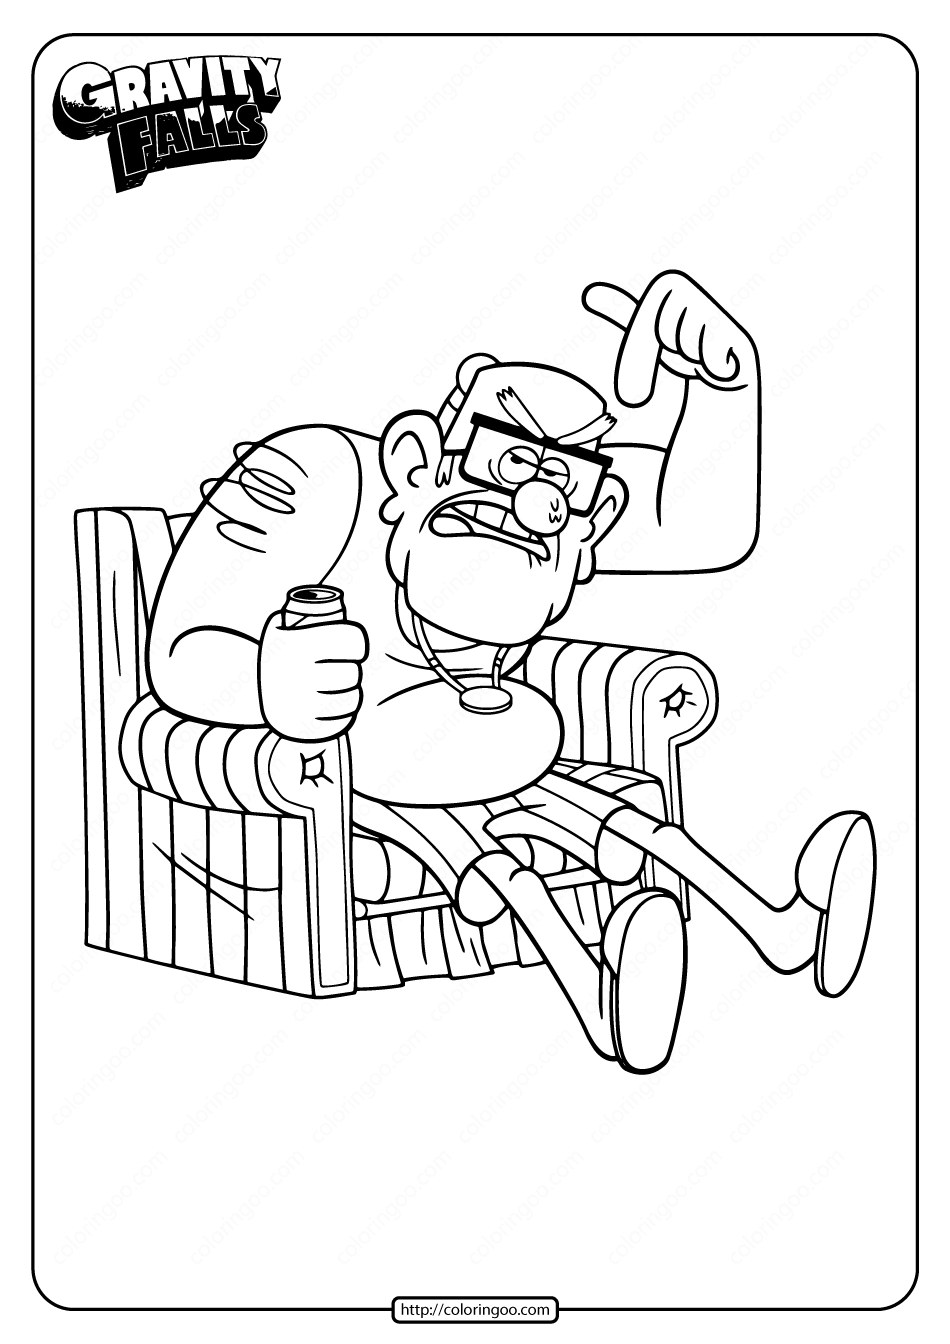 Printable Gravity Falls Uncle Stan Coloring Pages